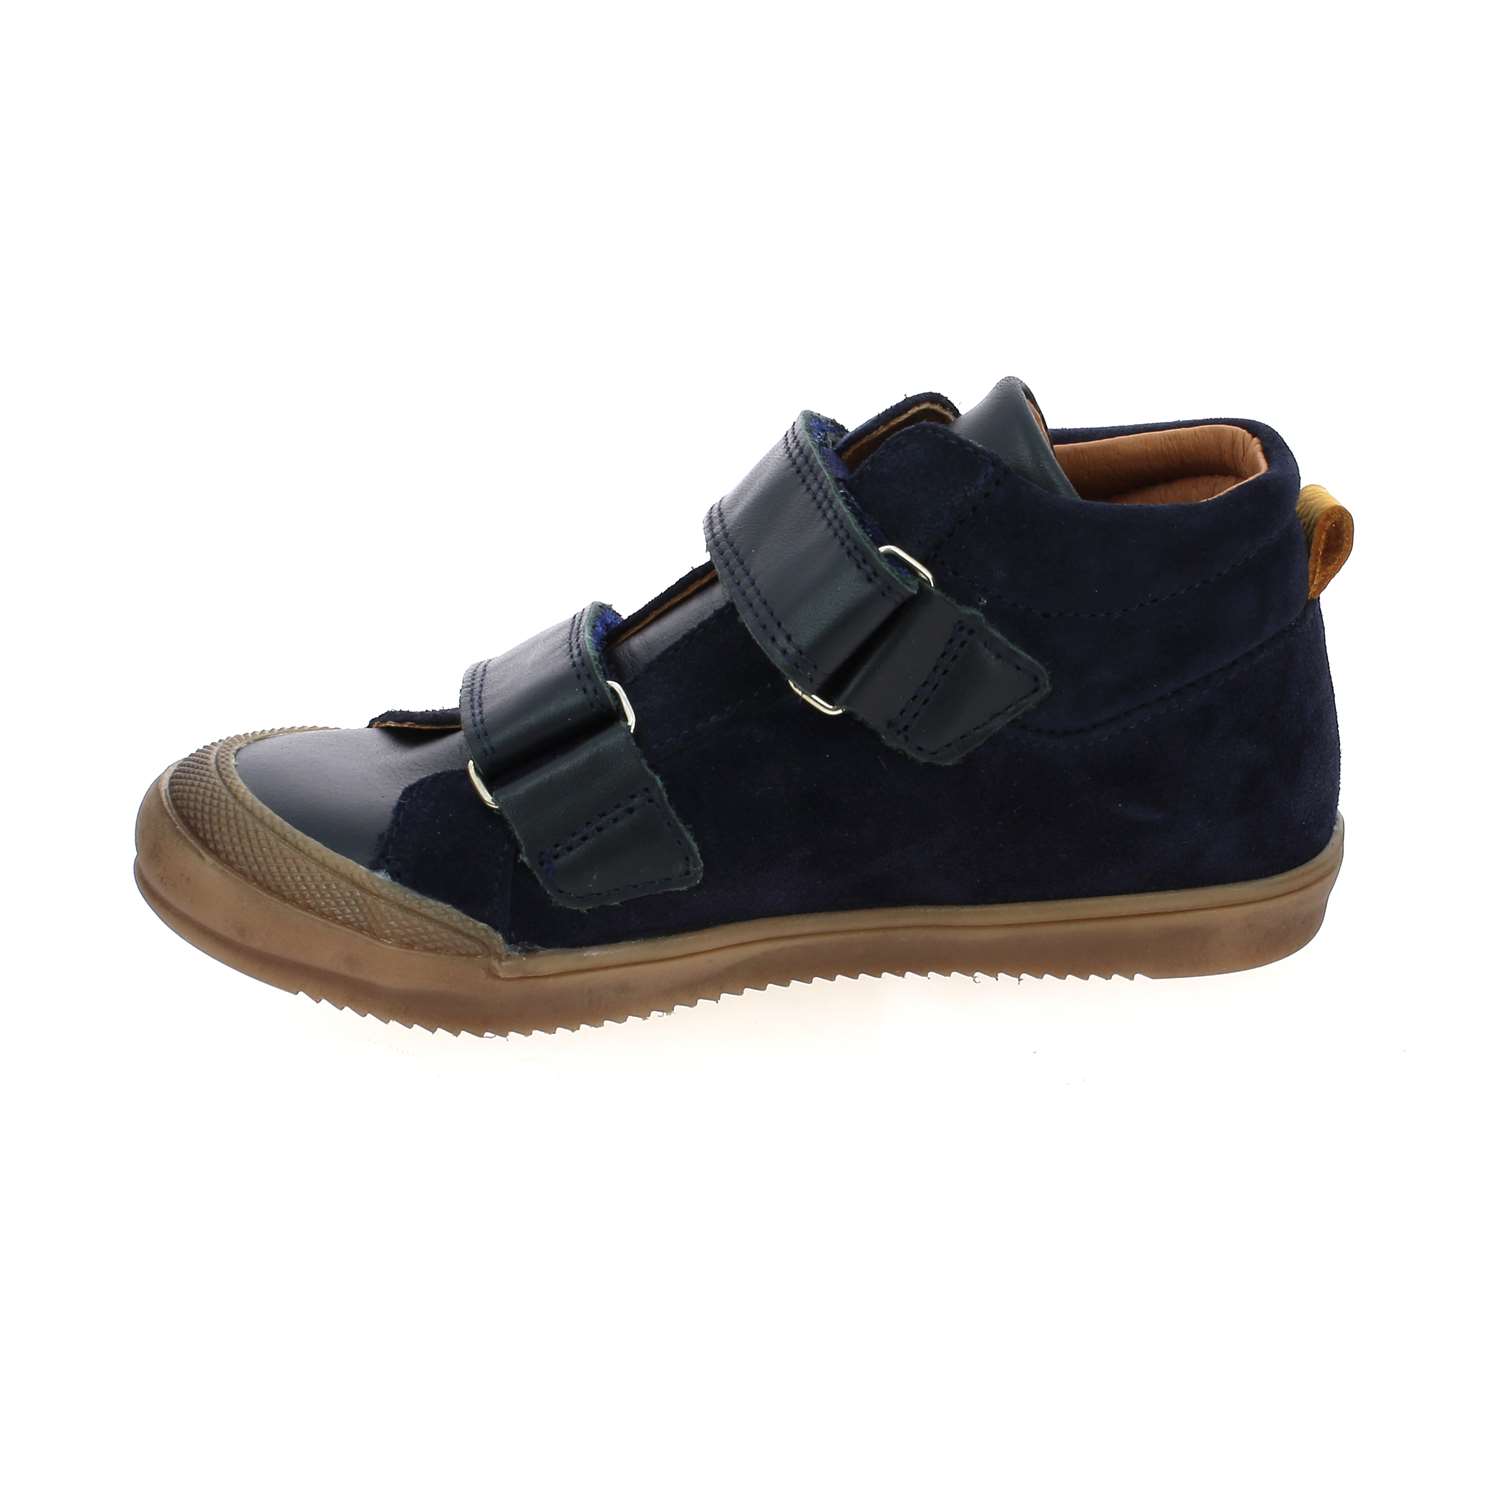 5 - BERRY - BELLAMY - Chaussures montantes - Synthétique, Cuir